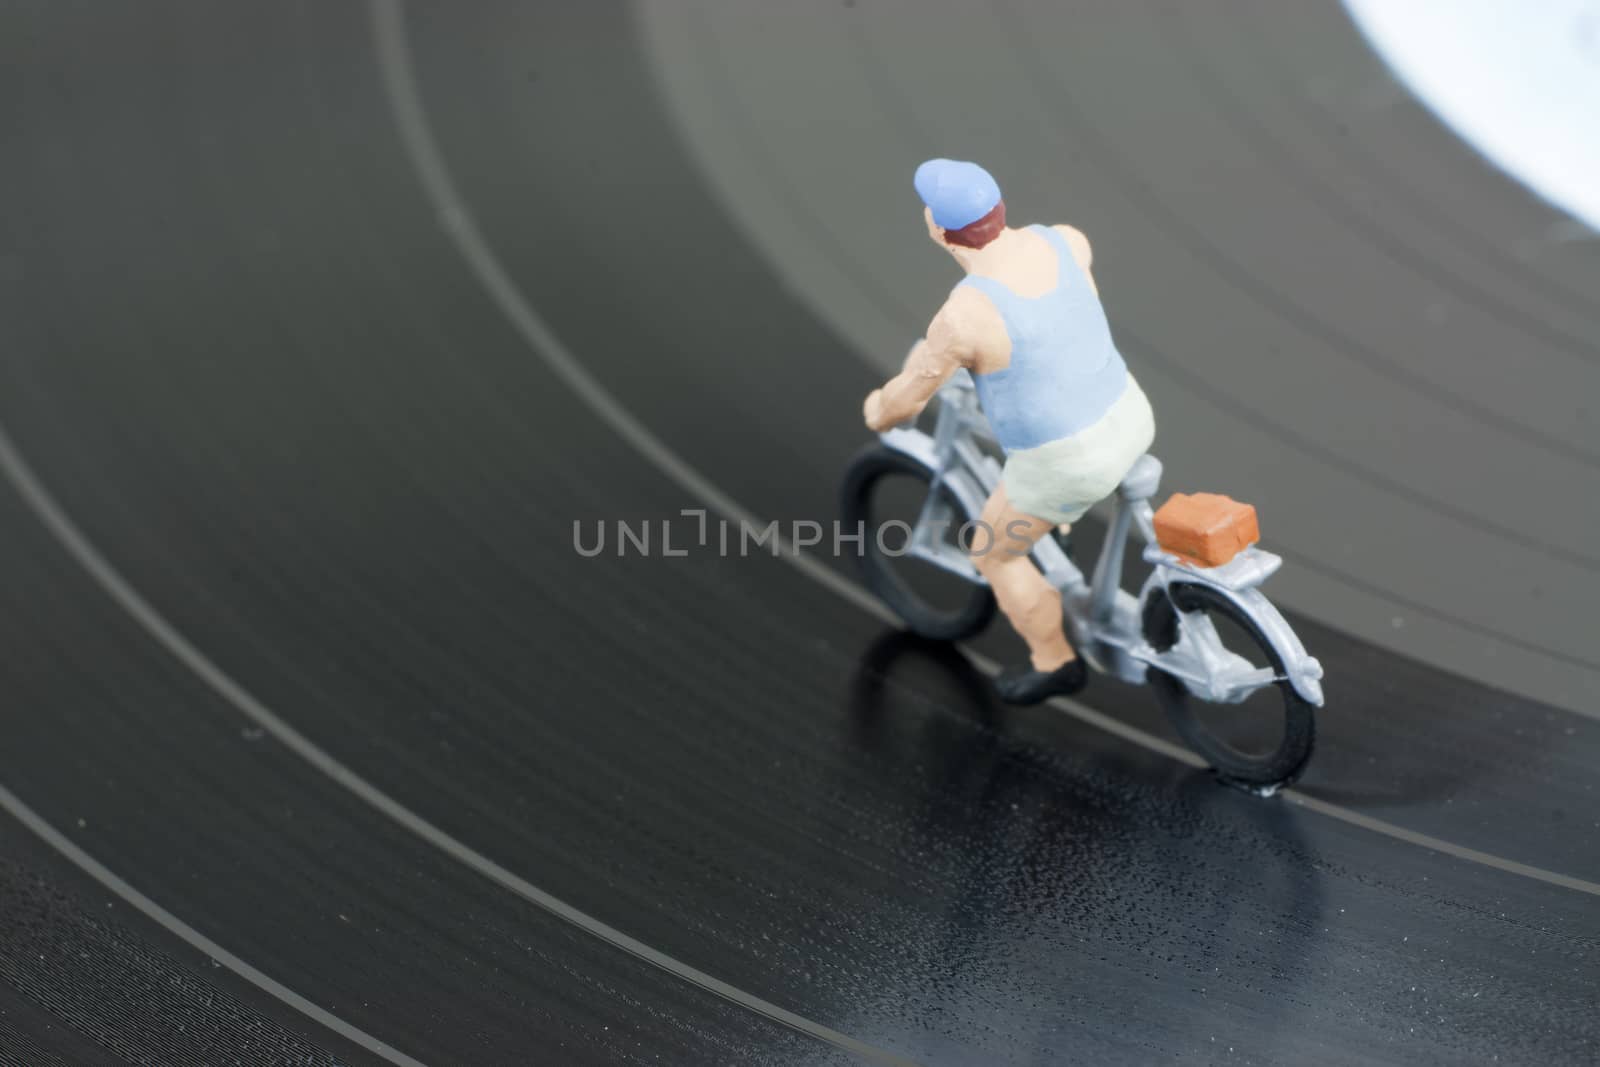 Model people having a cycle race on a record